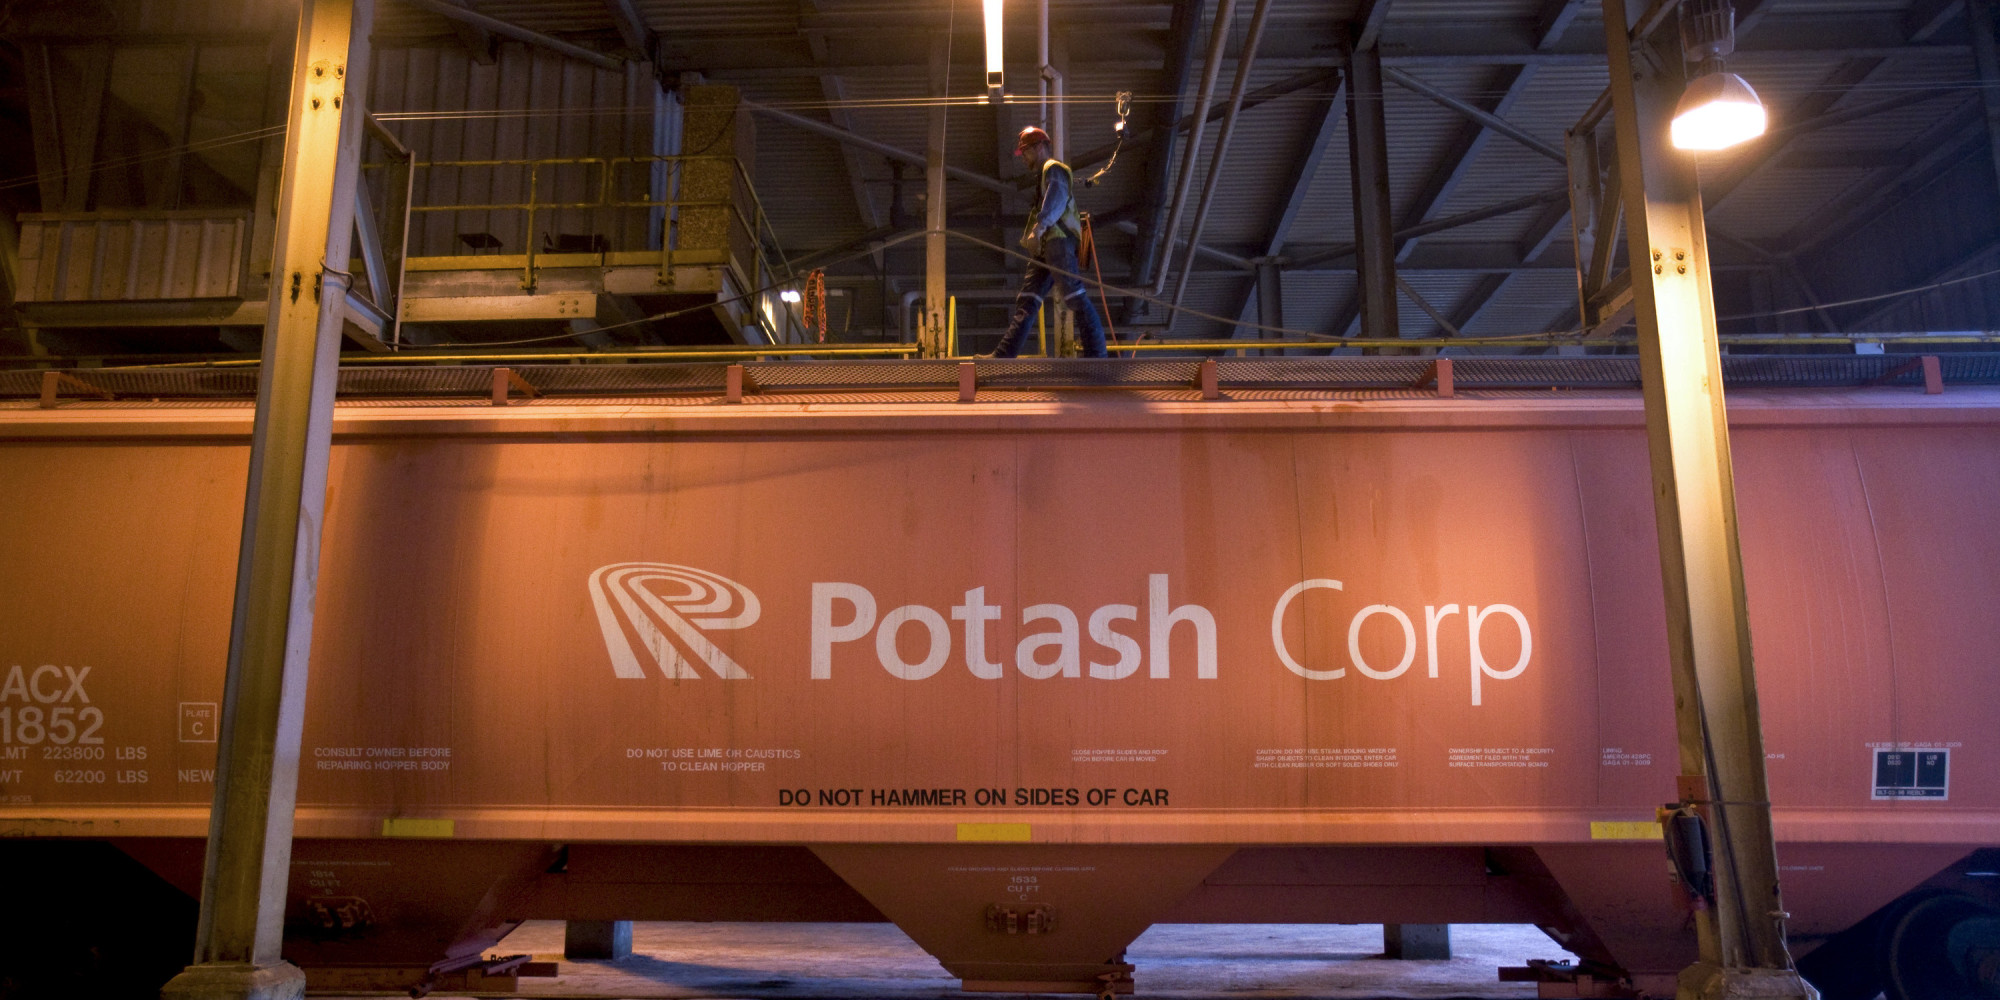 Market Update: Potash Corp Ended 2016 in Green